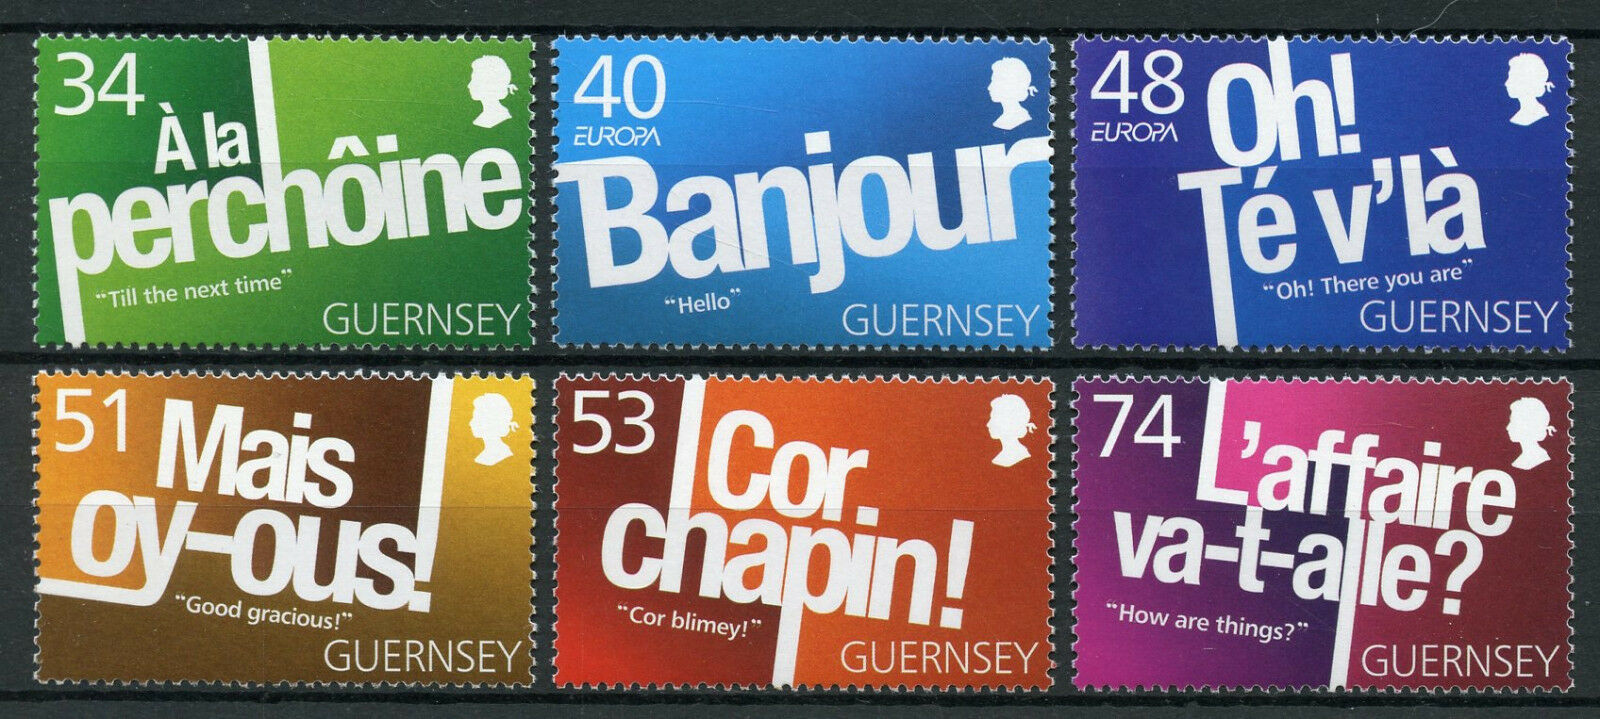 Guernsey 2008 MNH Guernsey-French Greetings Europa 6v Set Cultures Stamps